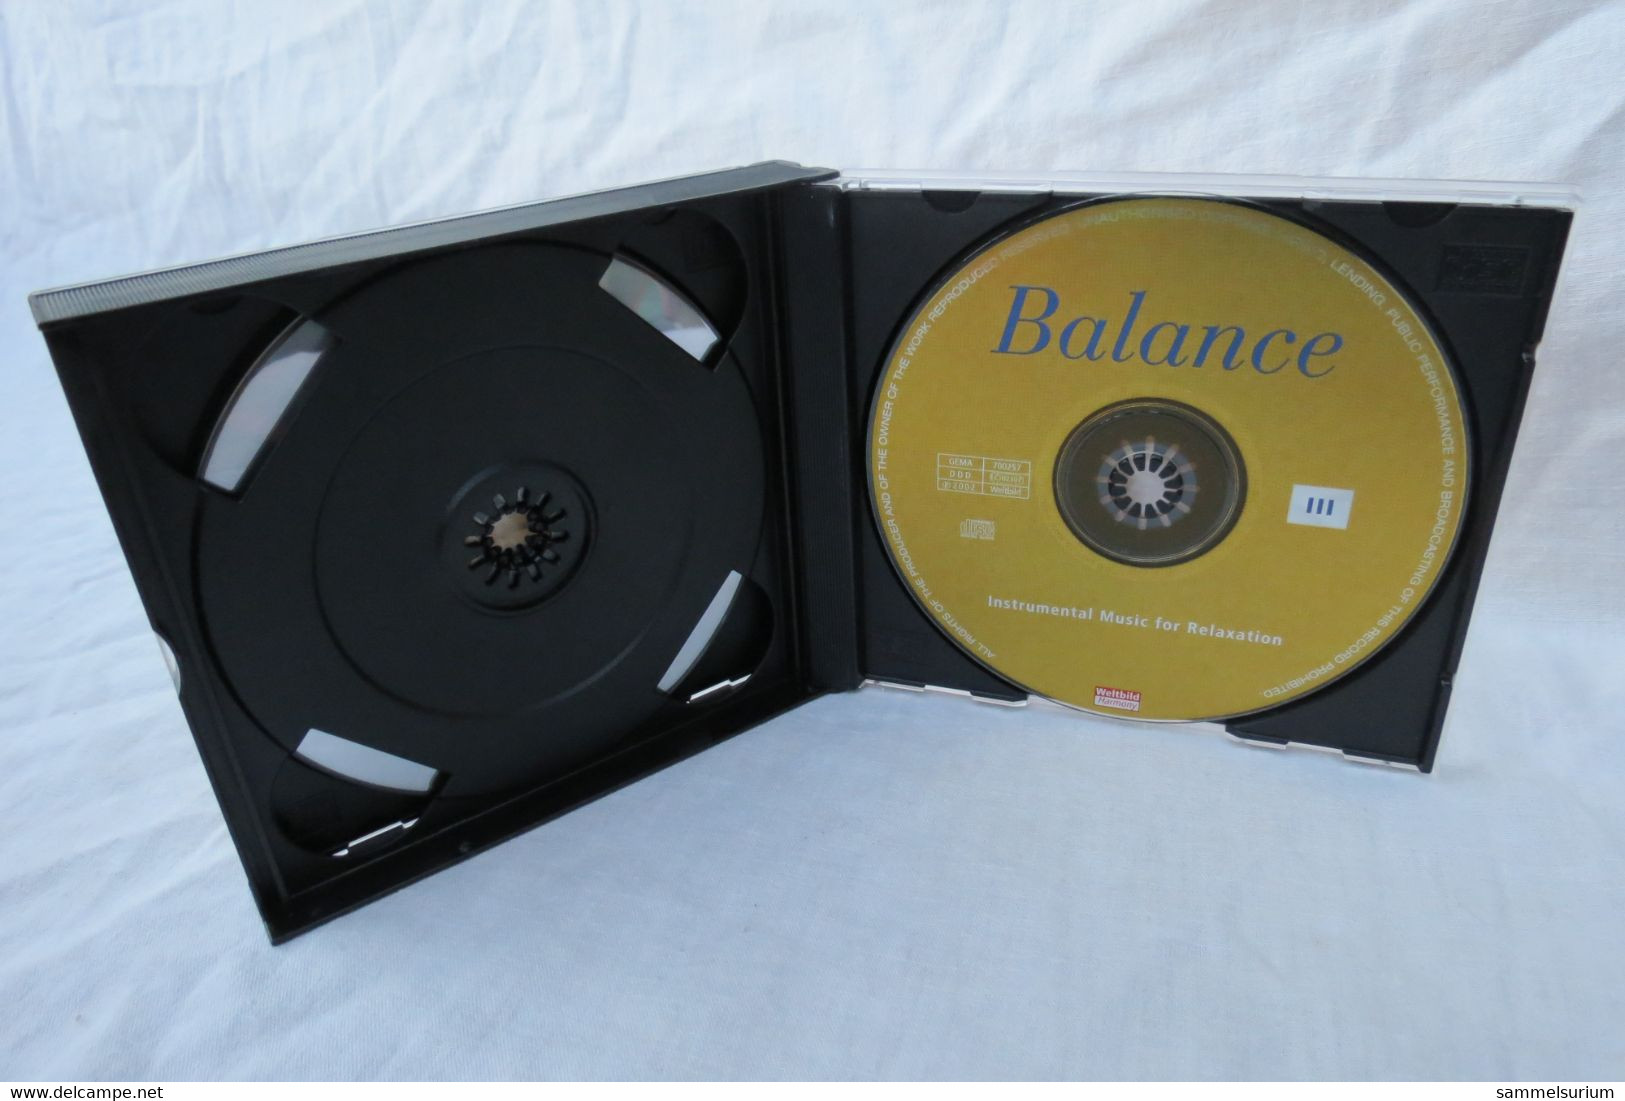 3 CDs "Balance" Instrumental Music For Relaxation - Instrumentaal